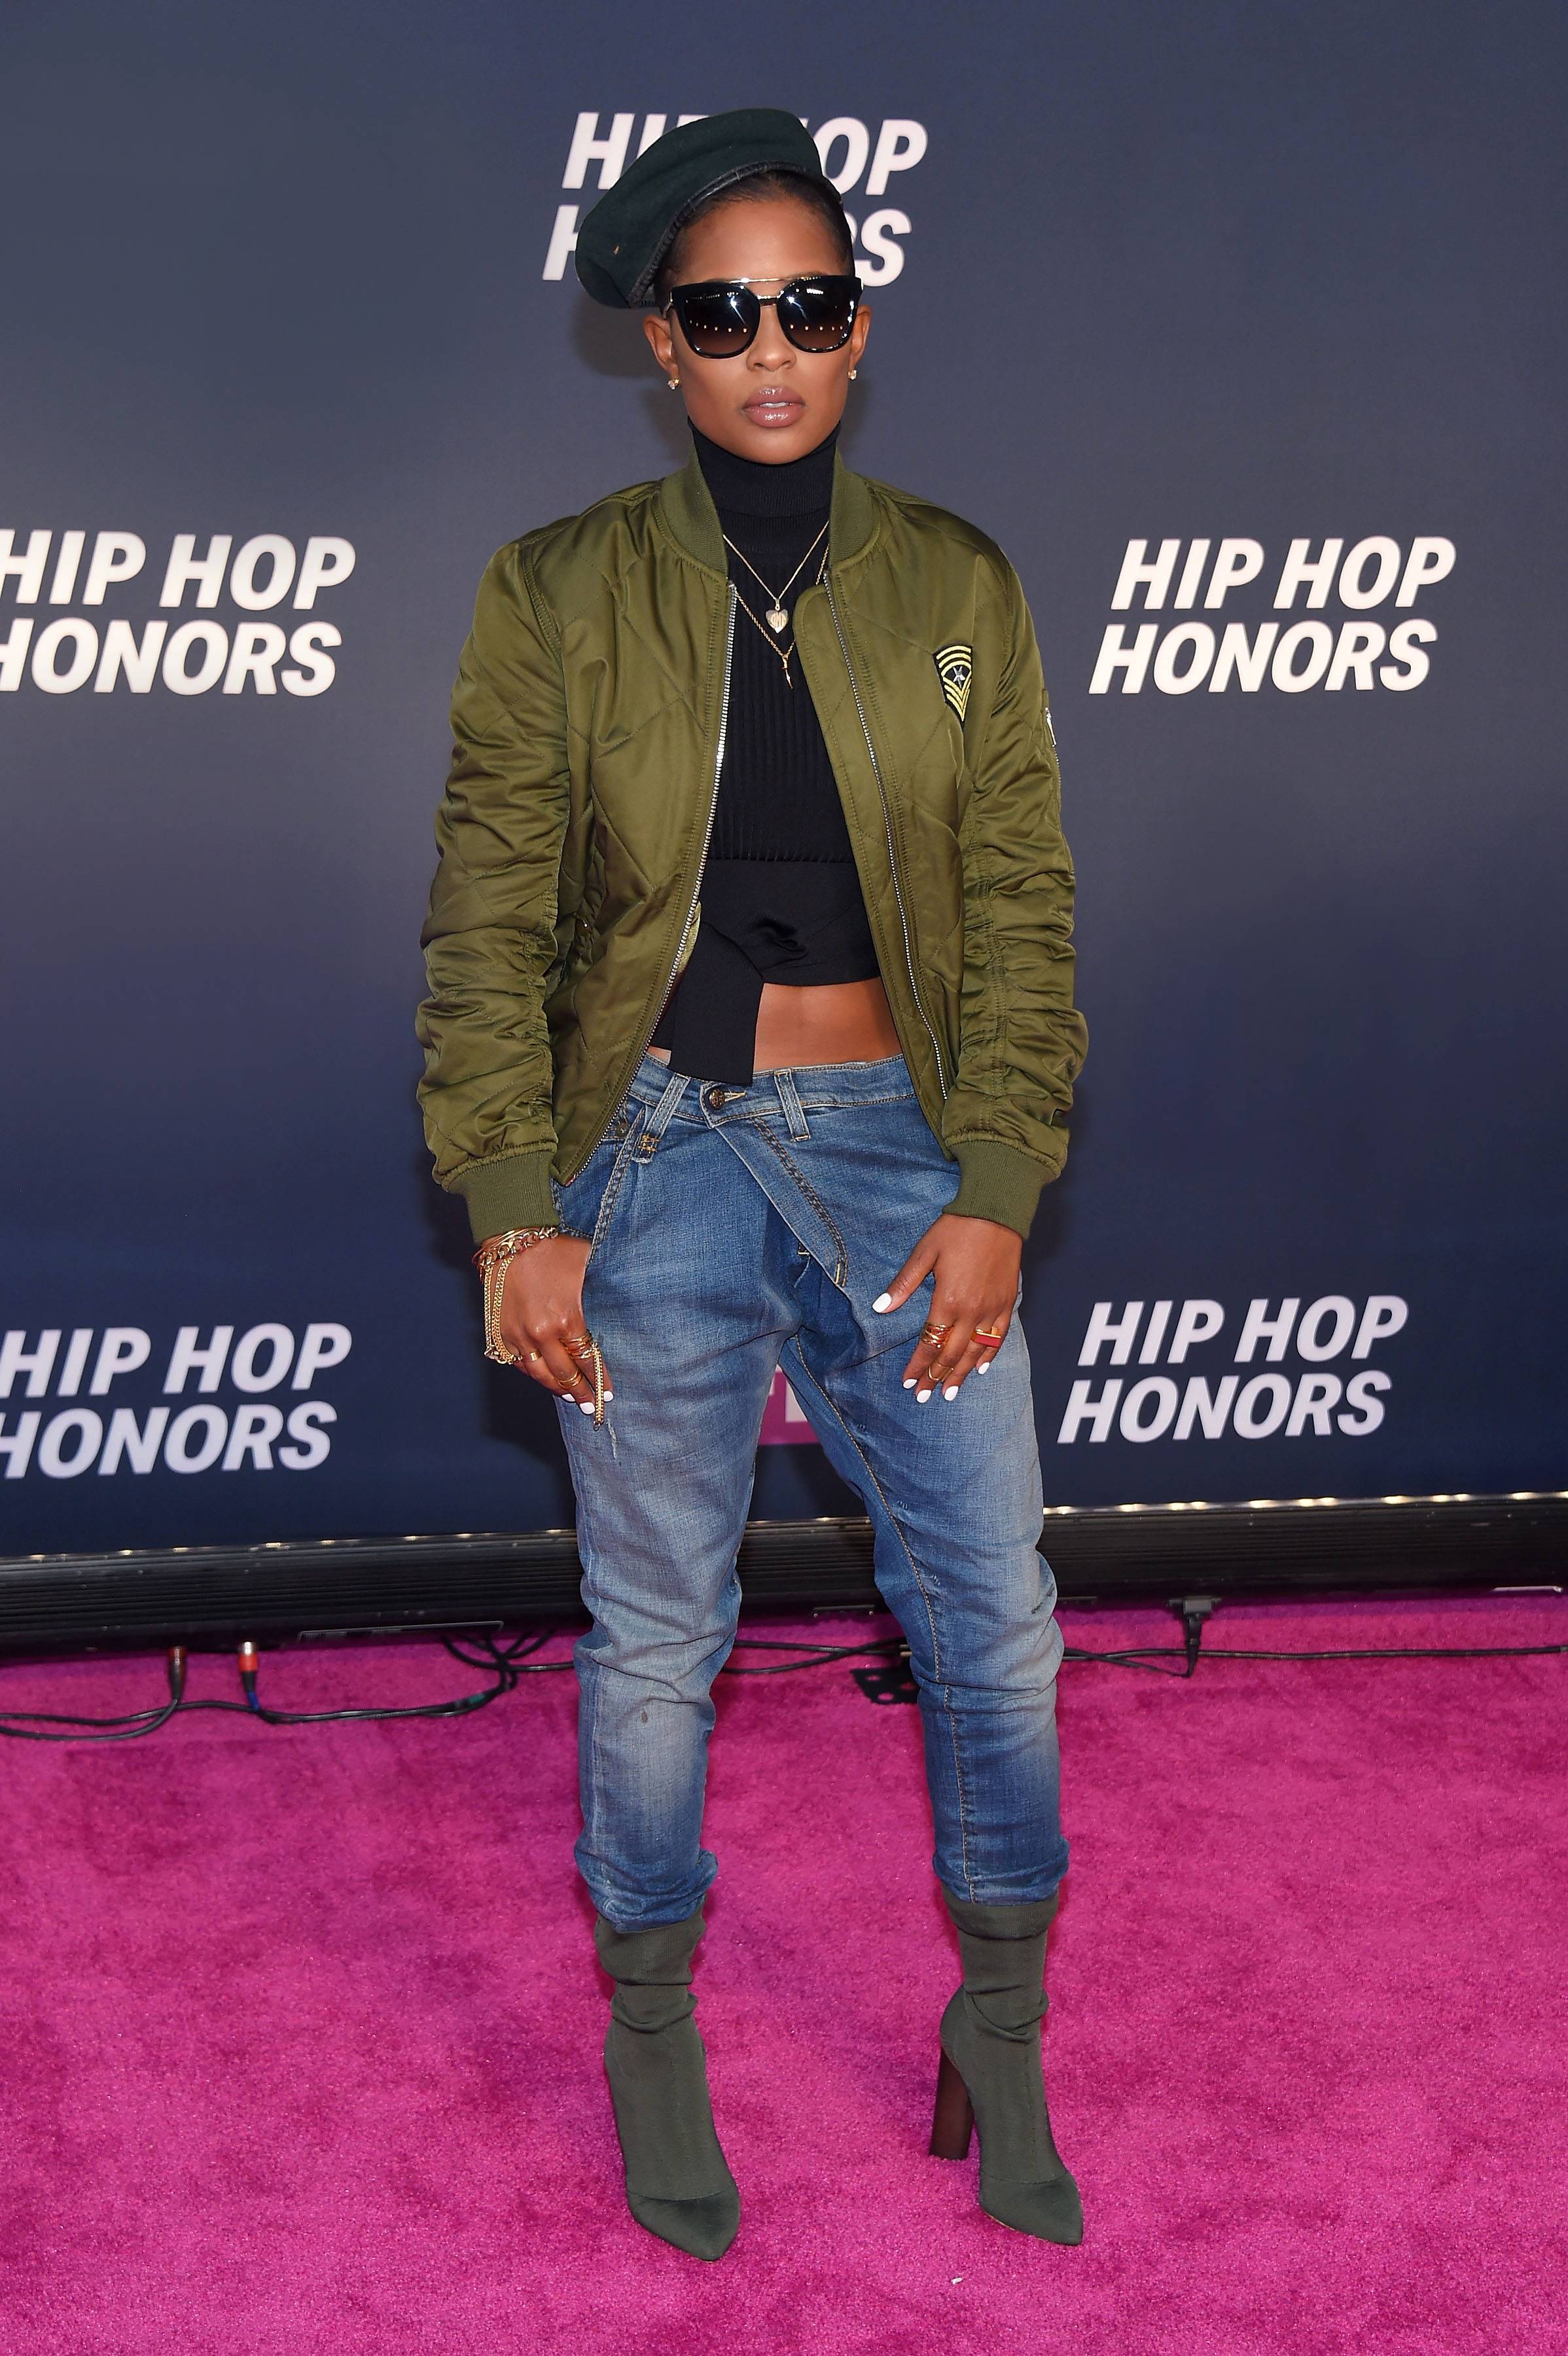 Dej Loaf attends the VH1 Hip Hop Honors: All Hail The Queens at David Geffen Hall on July 11, 2016 in New York City. - (Photo: Michael Loccisano/Getty Images for VH1)